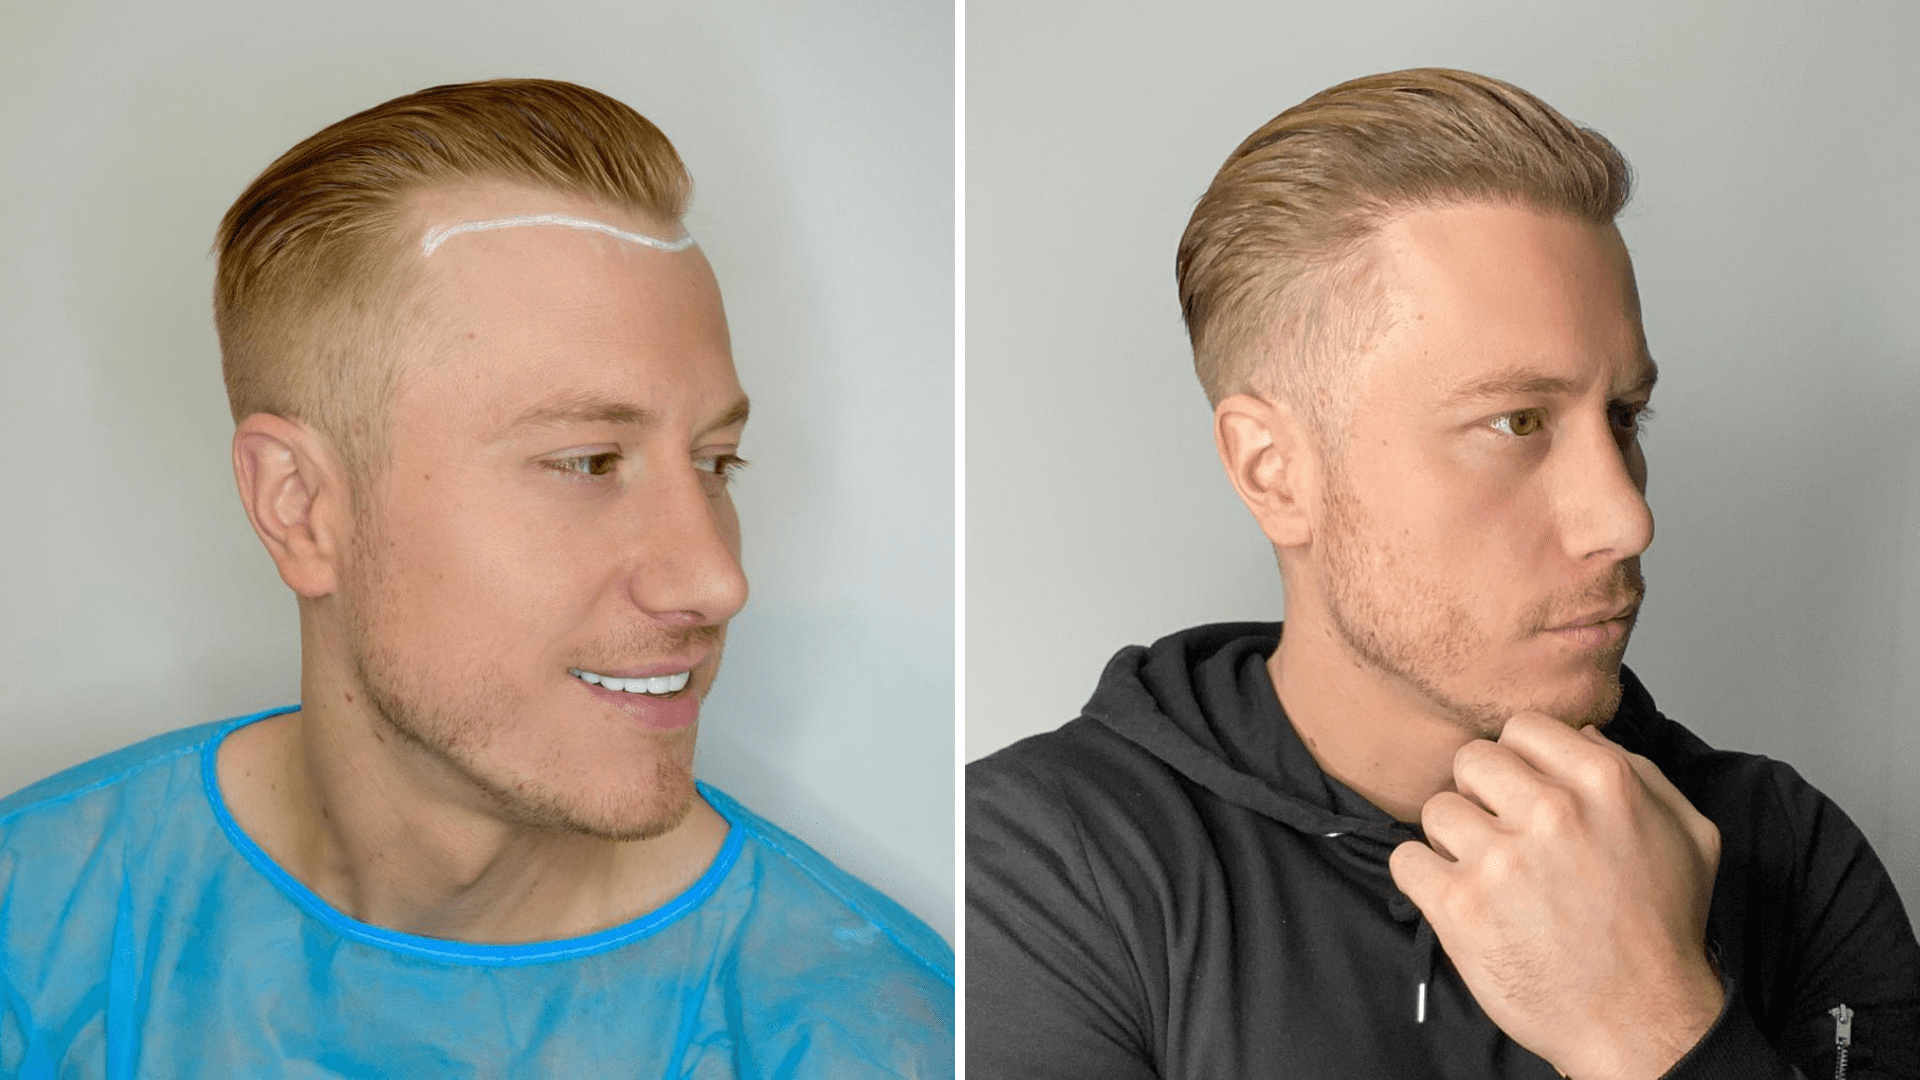 Hair Transplant after 3 months – what to expect